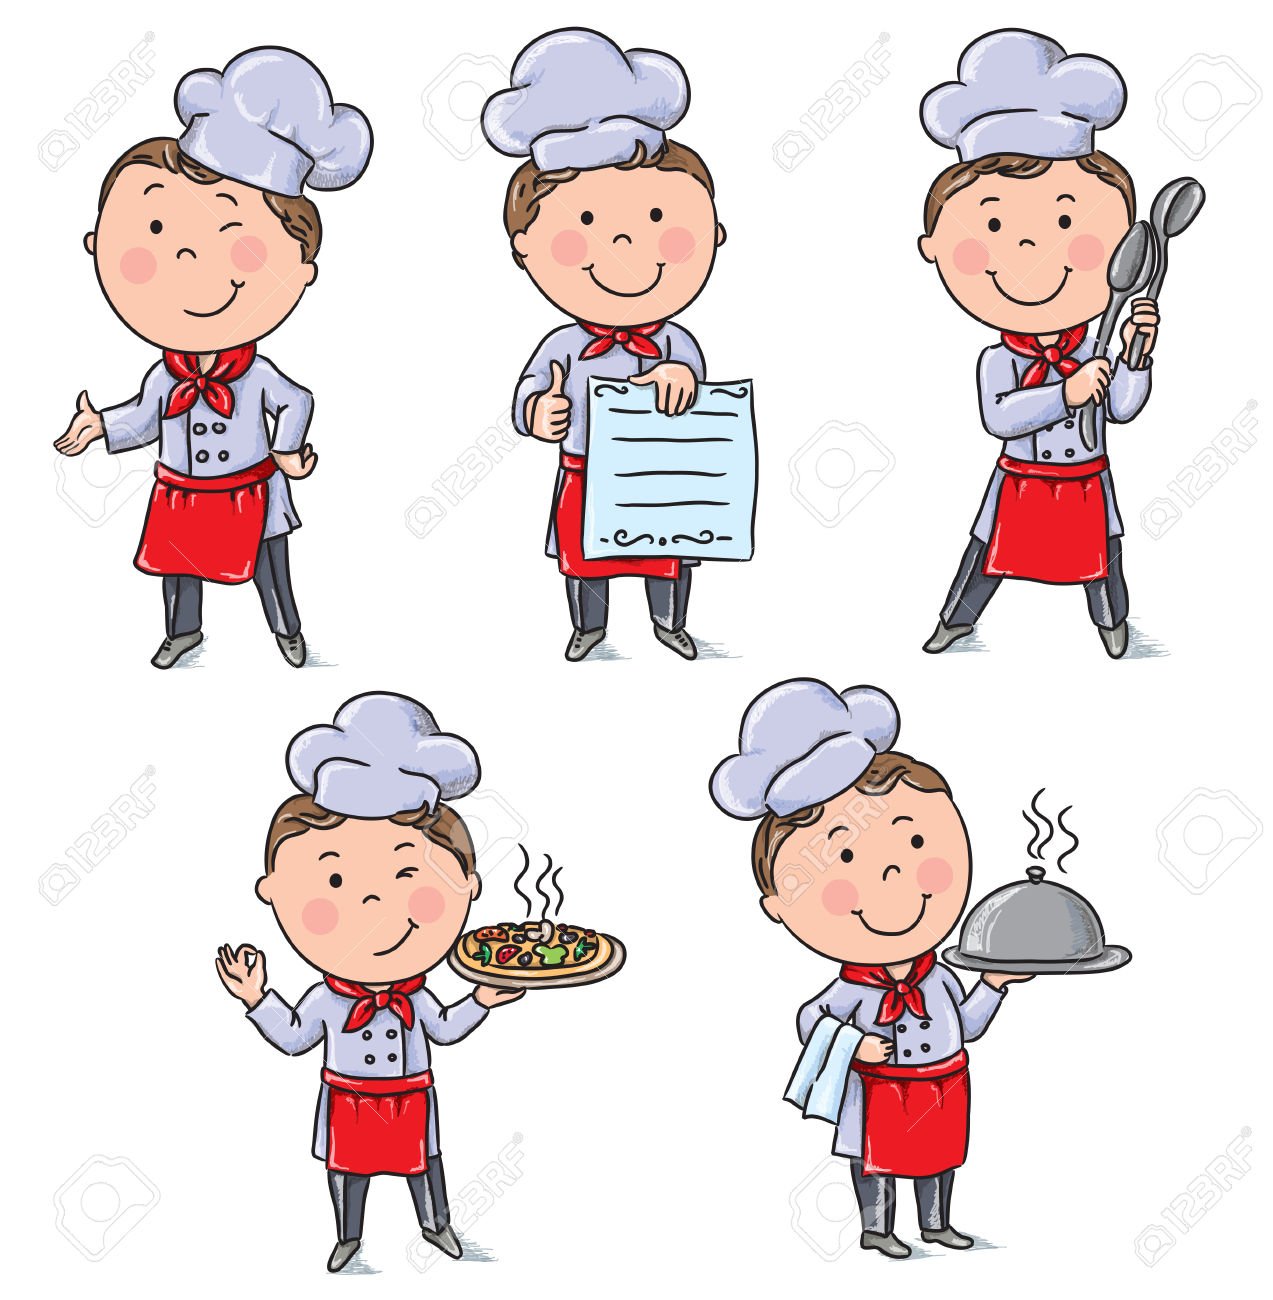 629 Kids Apron Stock Vector Illustration And Royalty Free Kids.